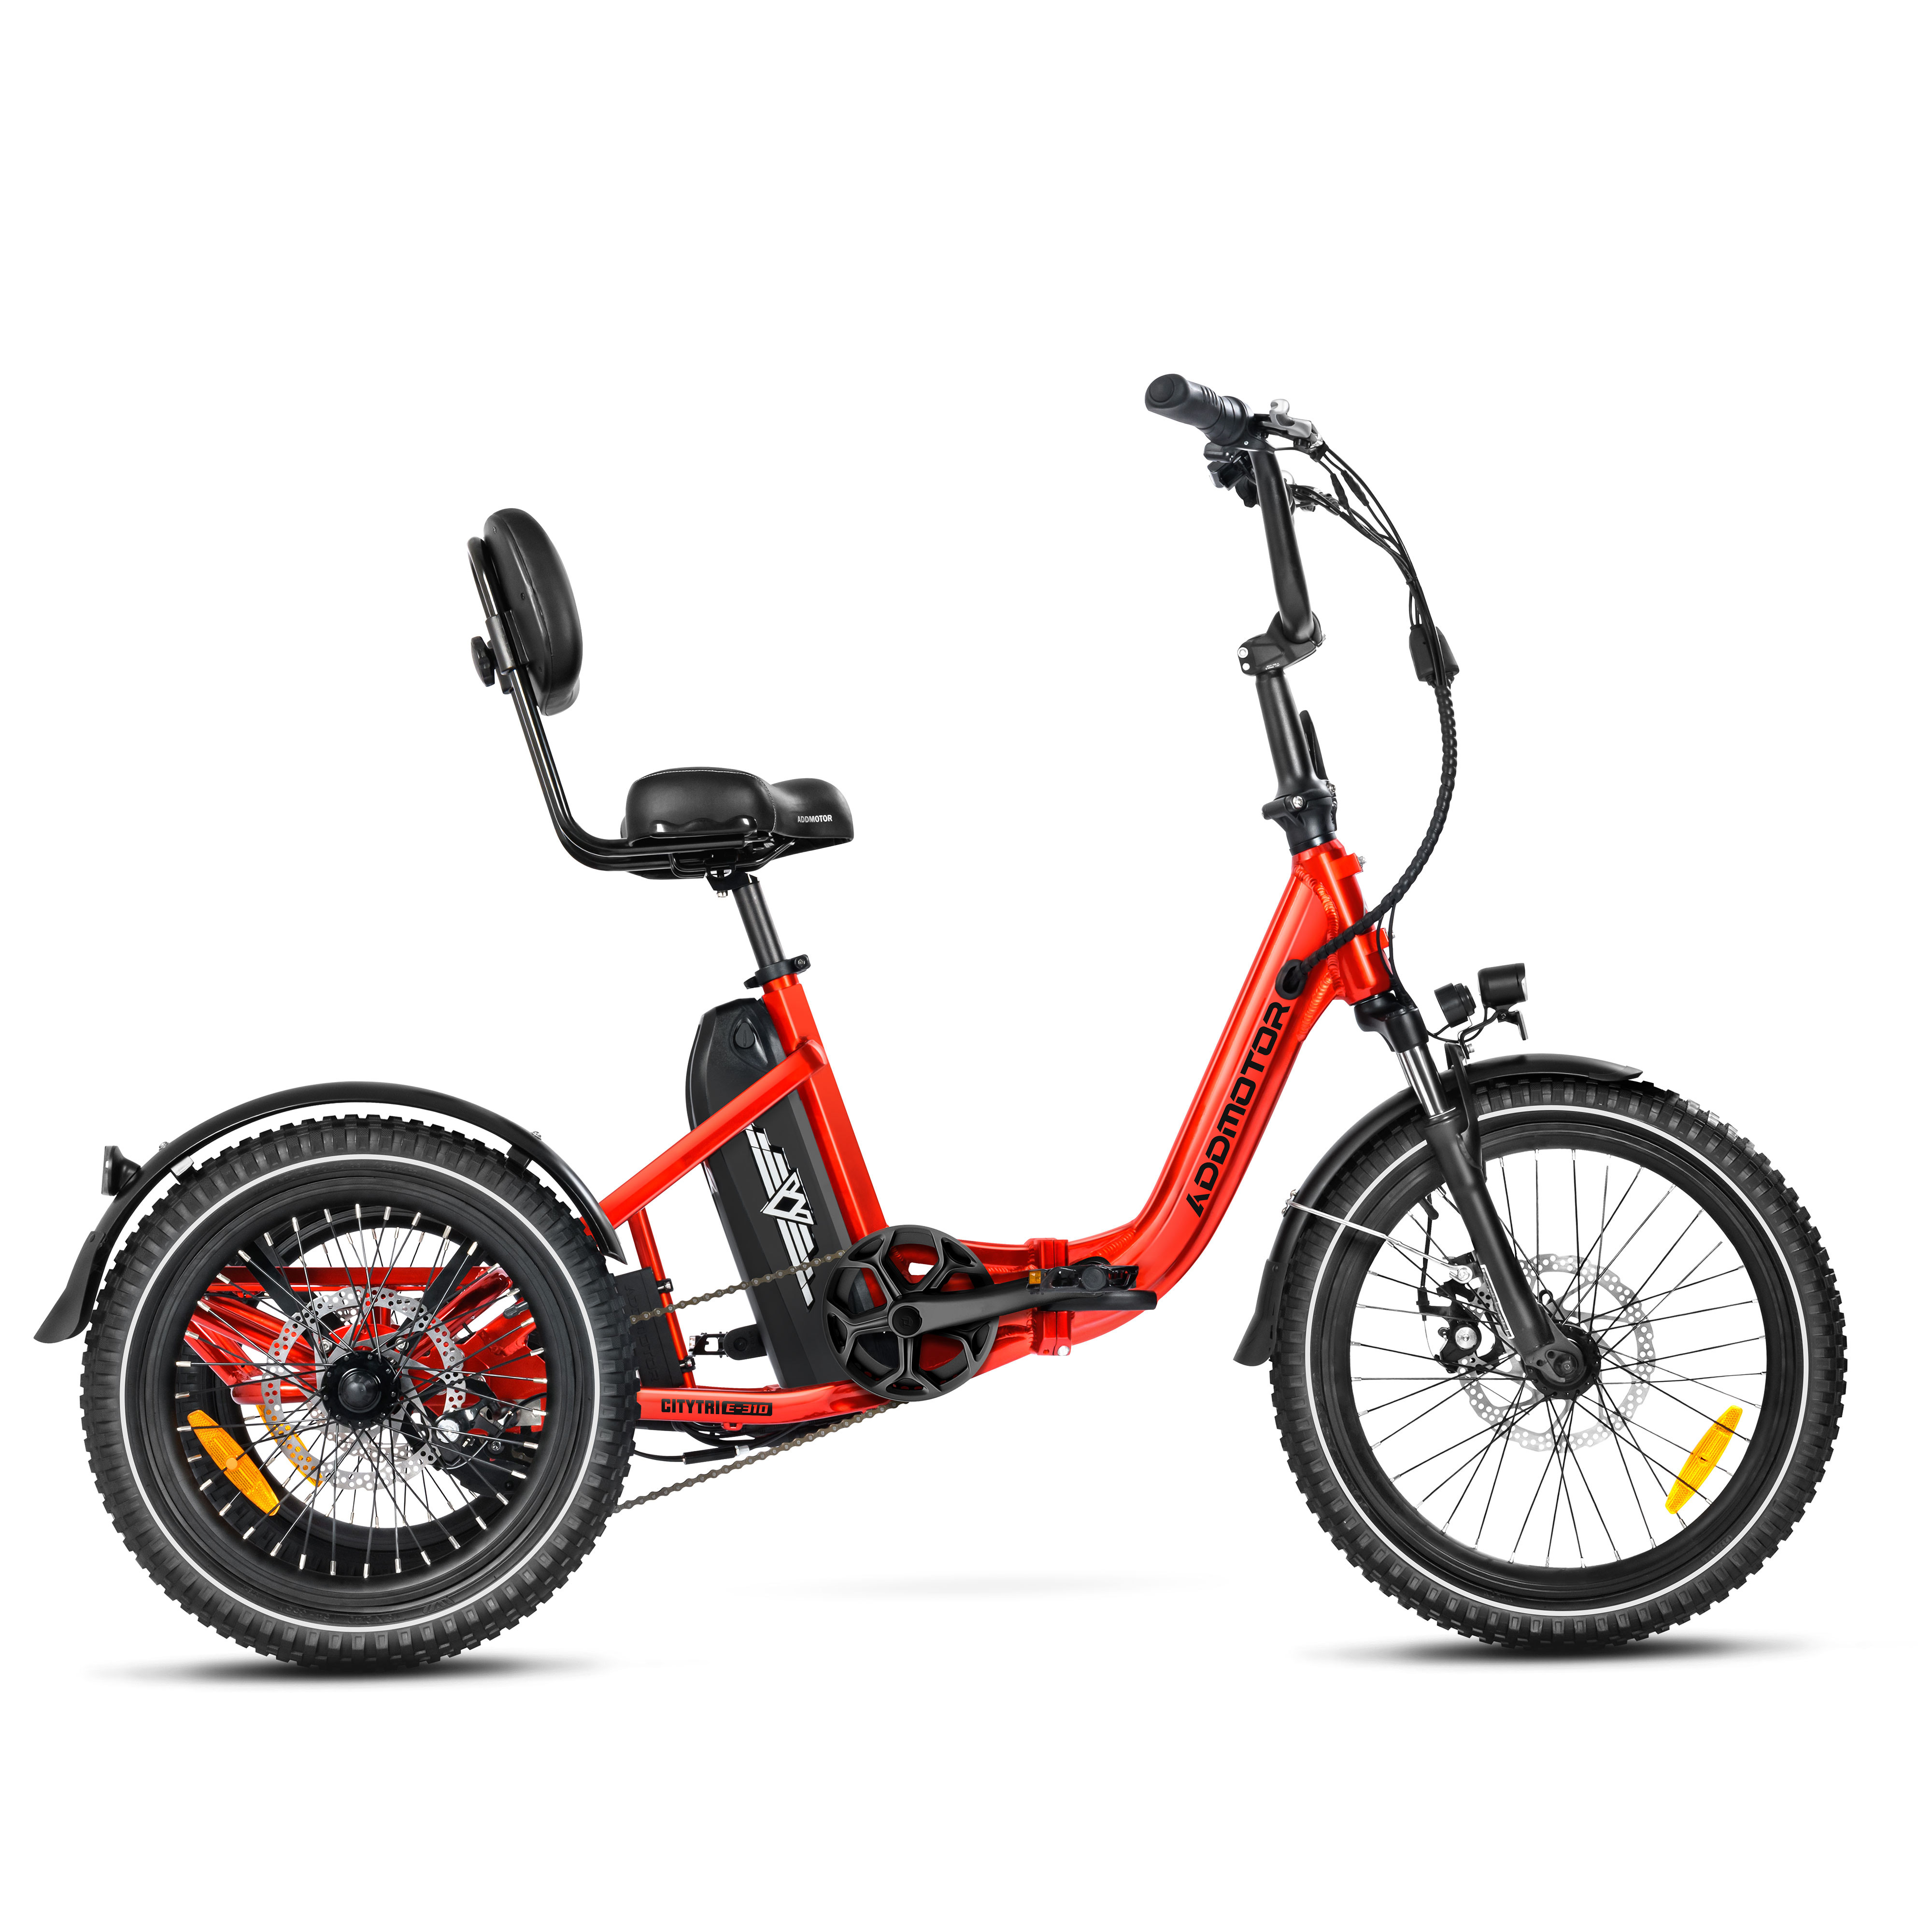 Addmotor Citytri E-310 750W Electric Trike for Adults Best Electric Tricycle Under $2000 Up To 95 Miles - Candy Red